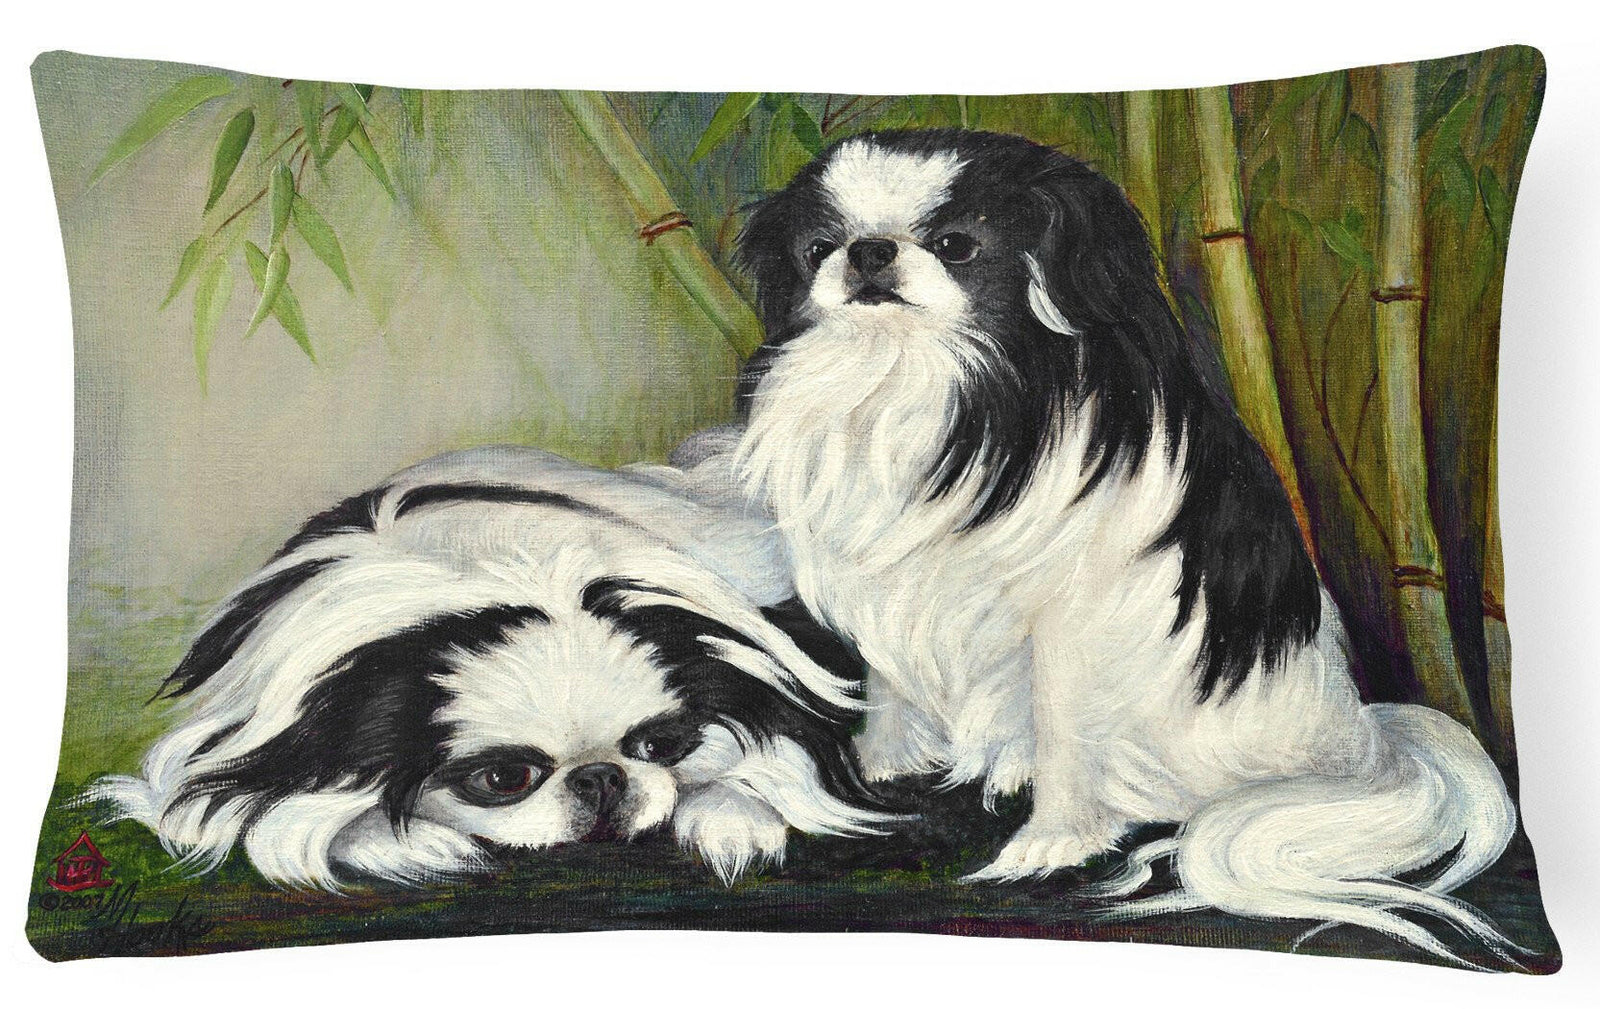 Japanese Chin Bamboo Garden Fabric Decorative Pillow MH1044PW1216 by Caroline's Treasures